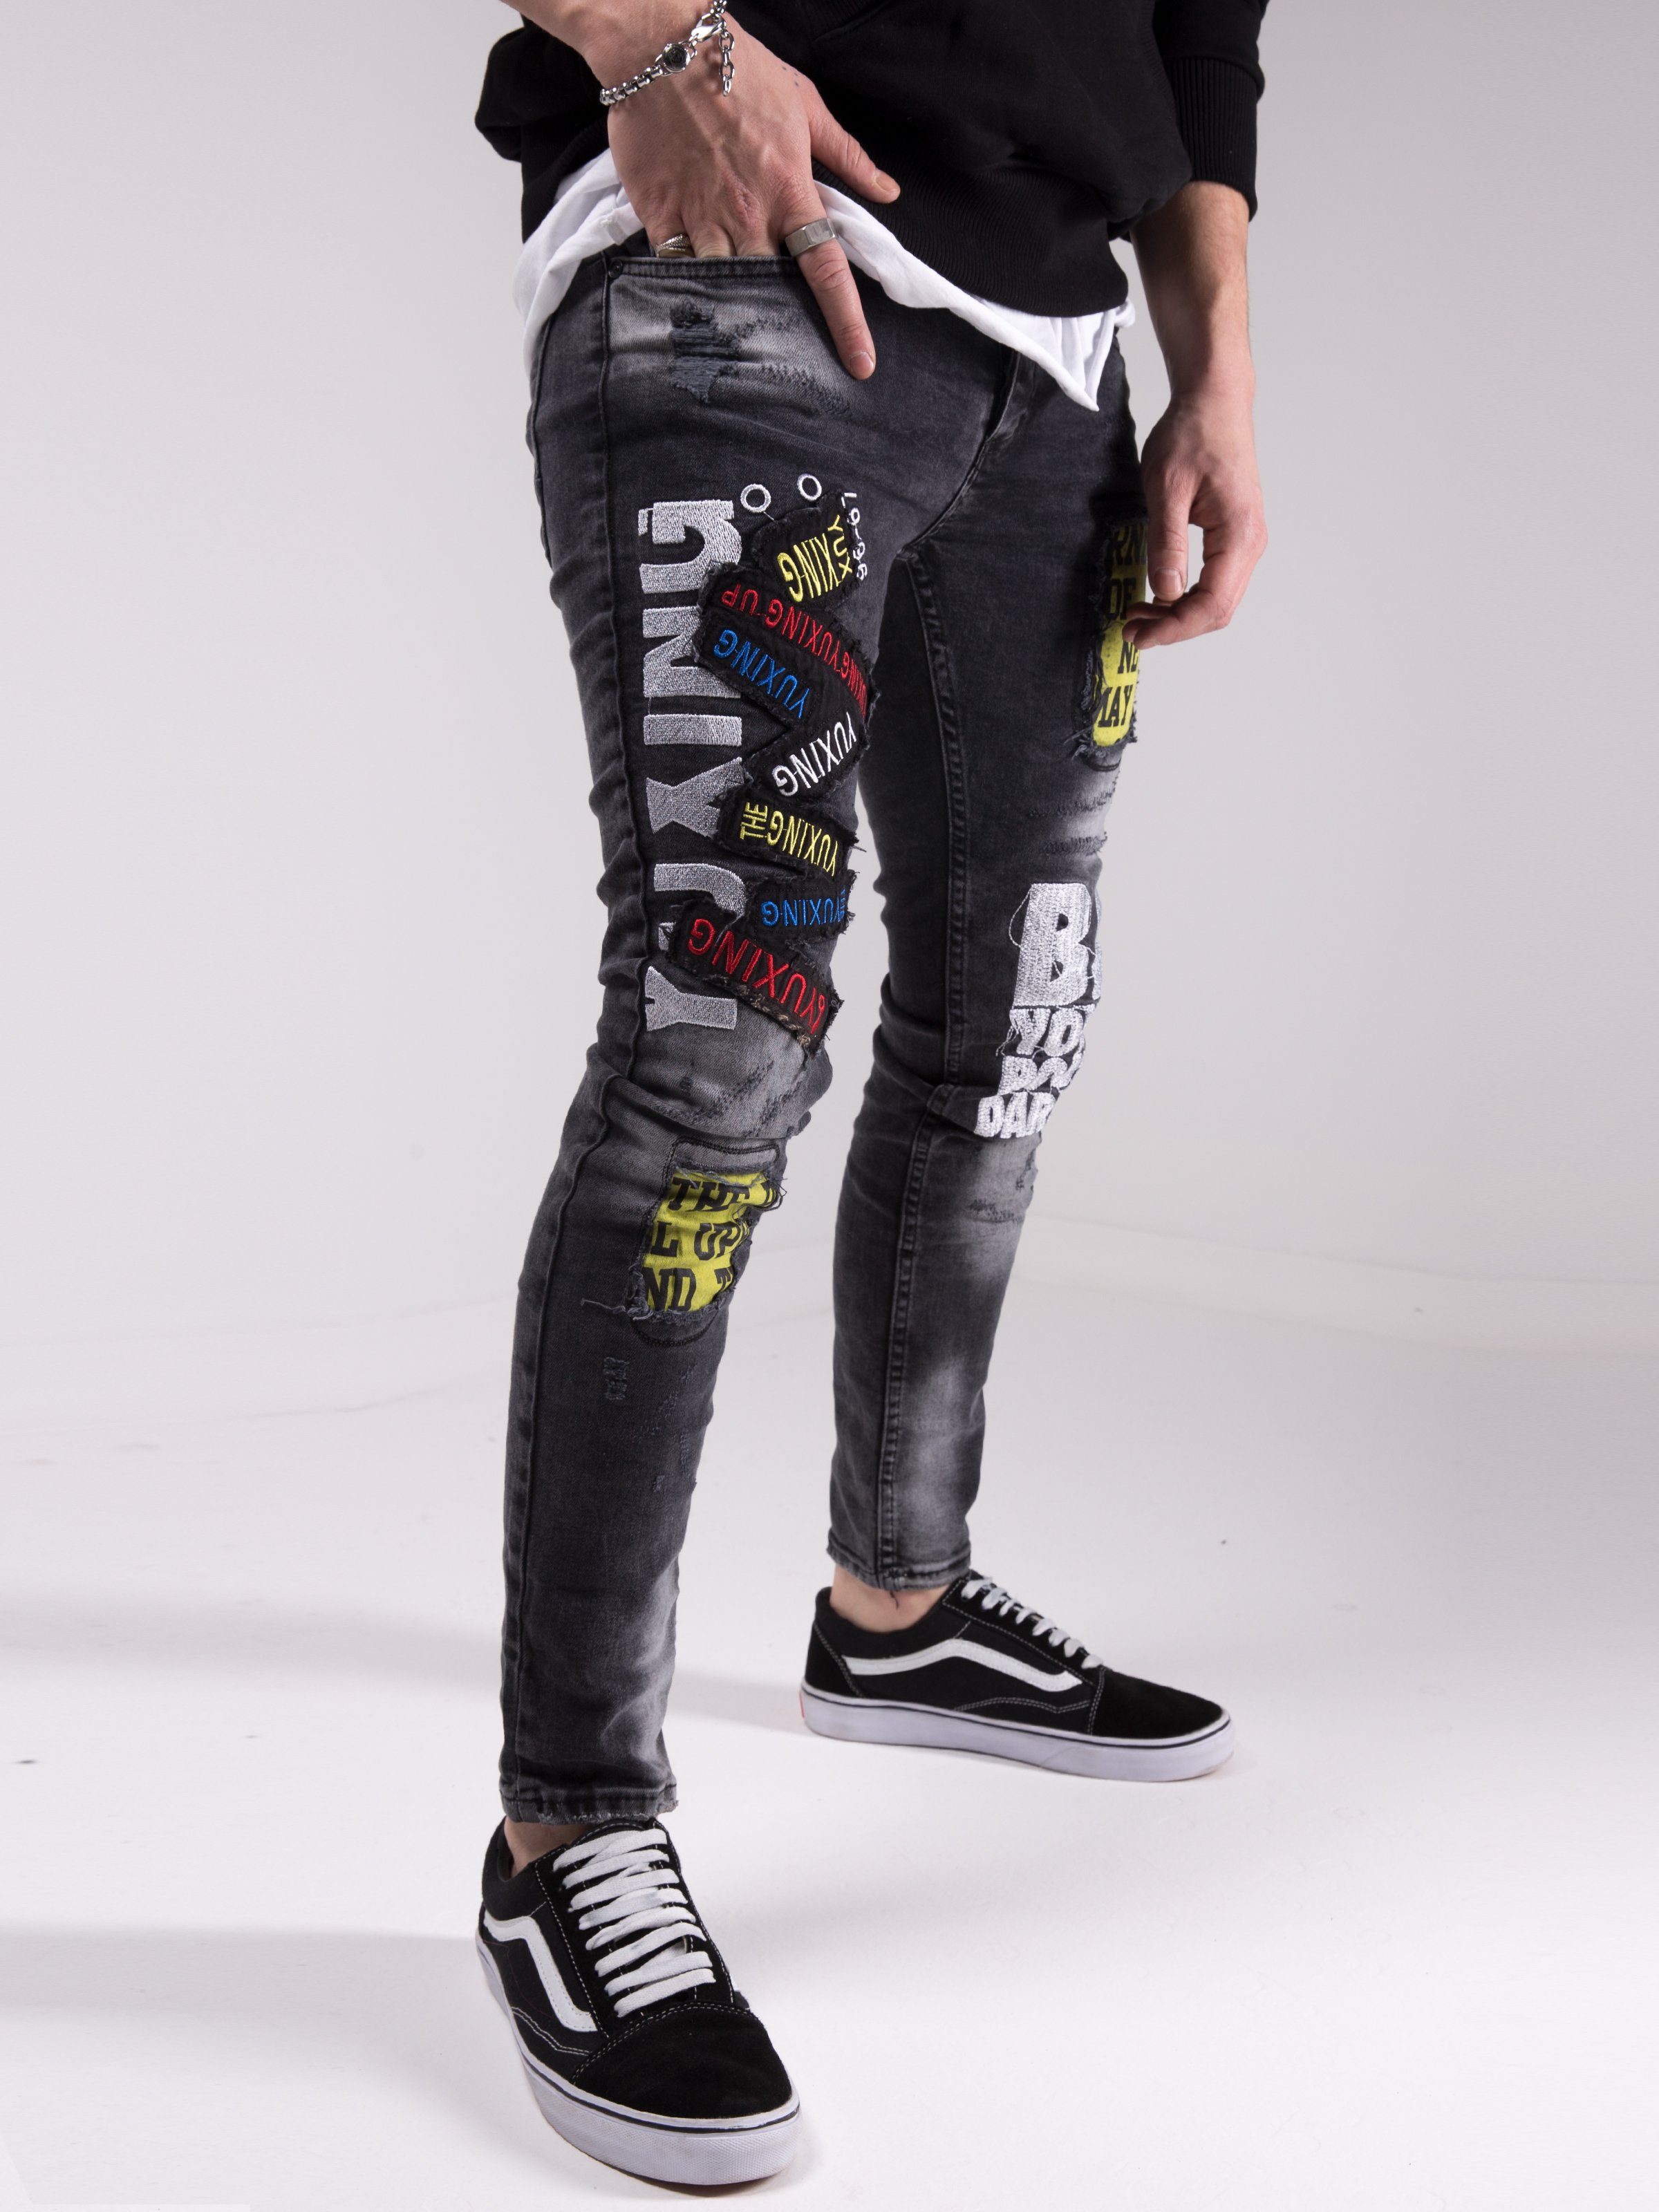 A man wearing a pair of SAVAGE SECRET jeans with graffiti on them.